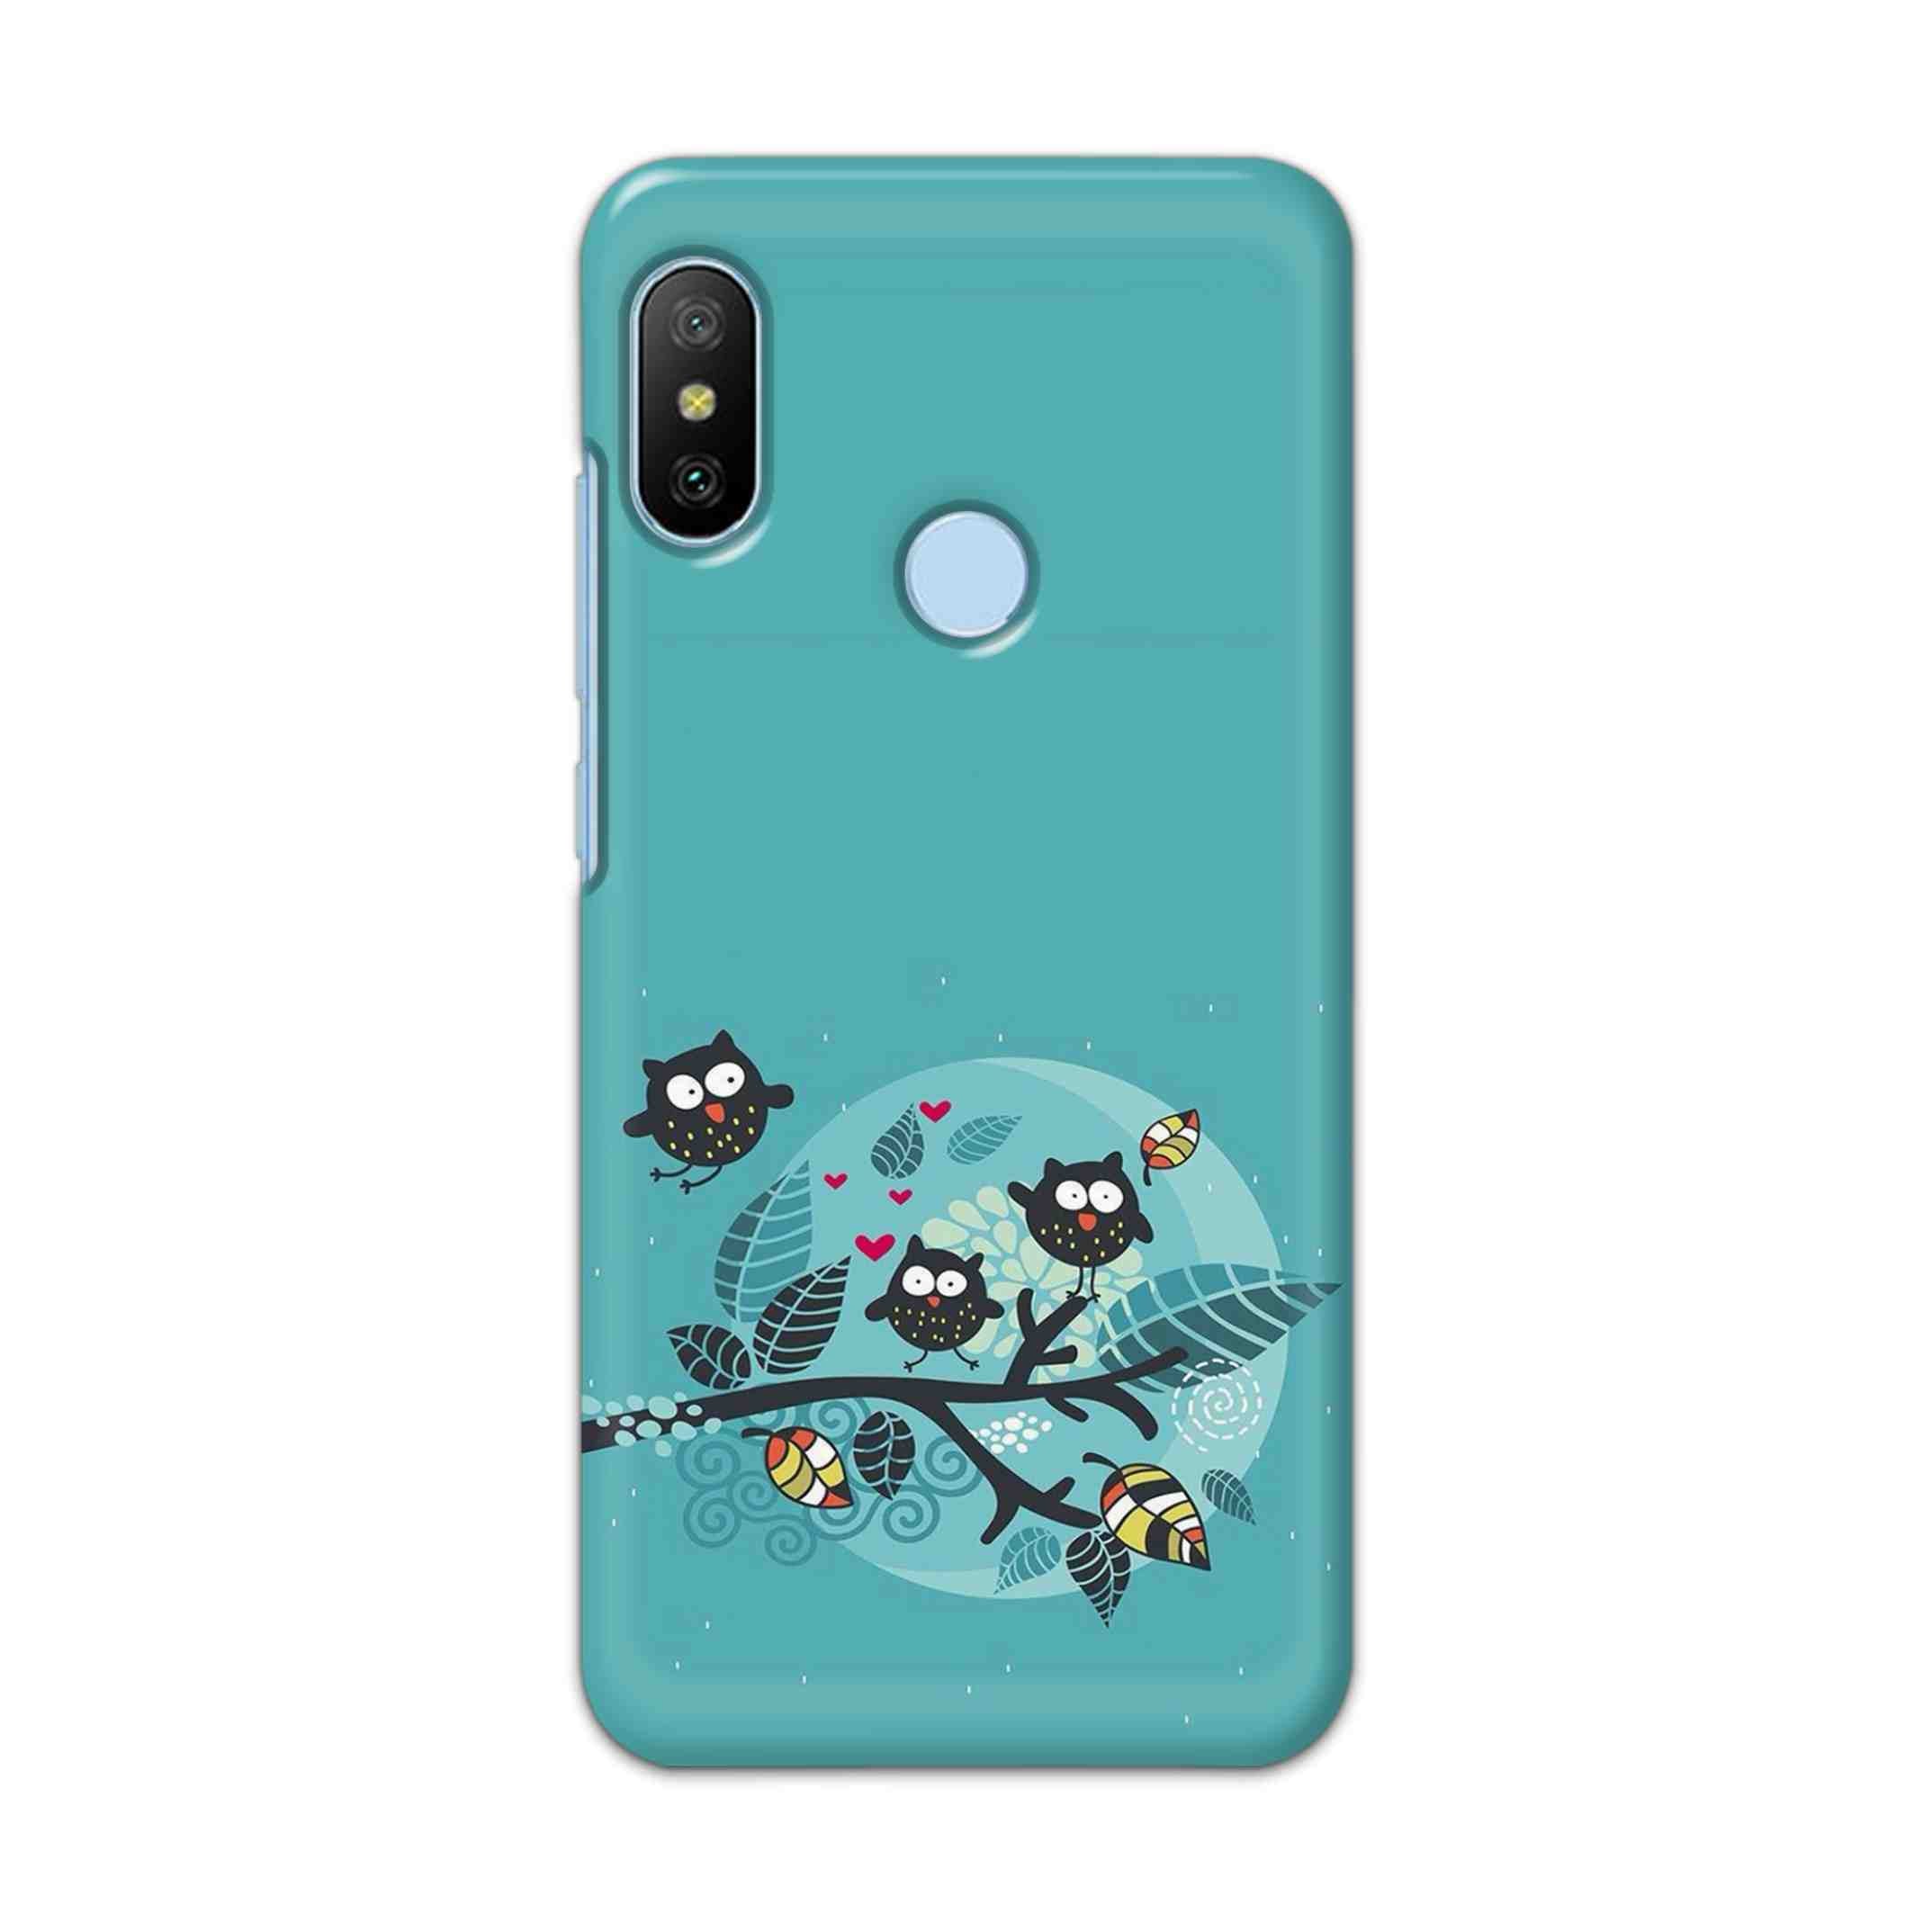 Buy Owl Hard Back Mobile Phone Case/Cover For Xiaomi Redmi 6 Pro Online